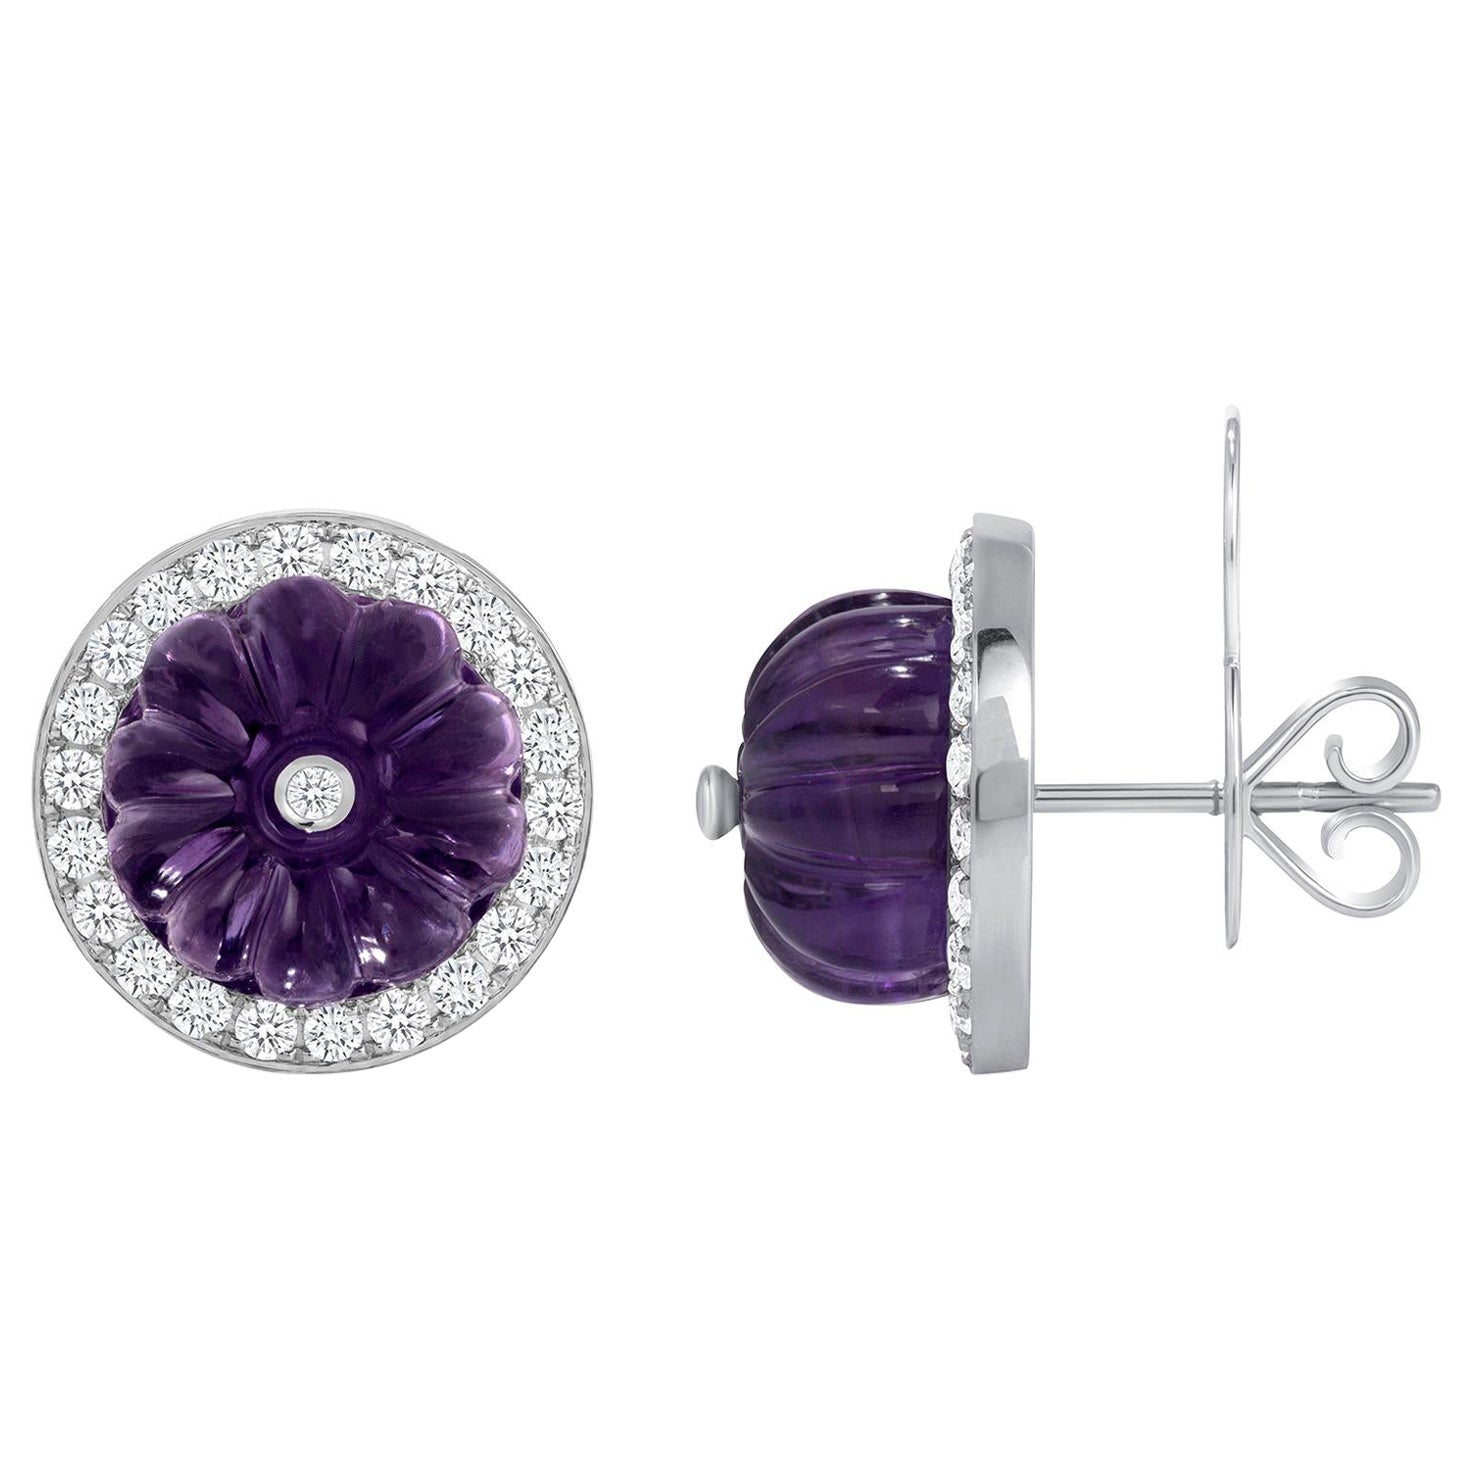 14K White Gold Lux Art Deco Lux Diamond & Carved Amethyst Earring For Sale